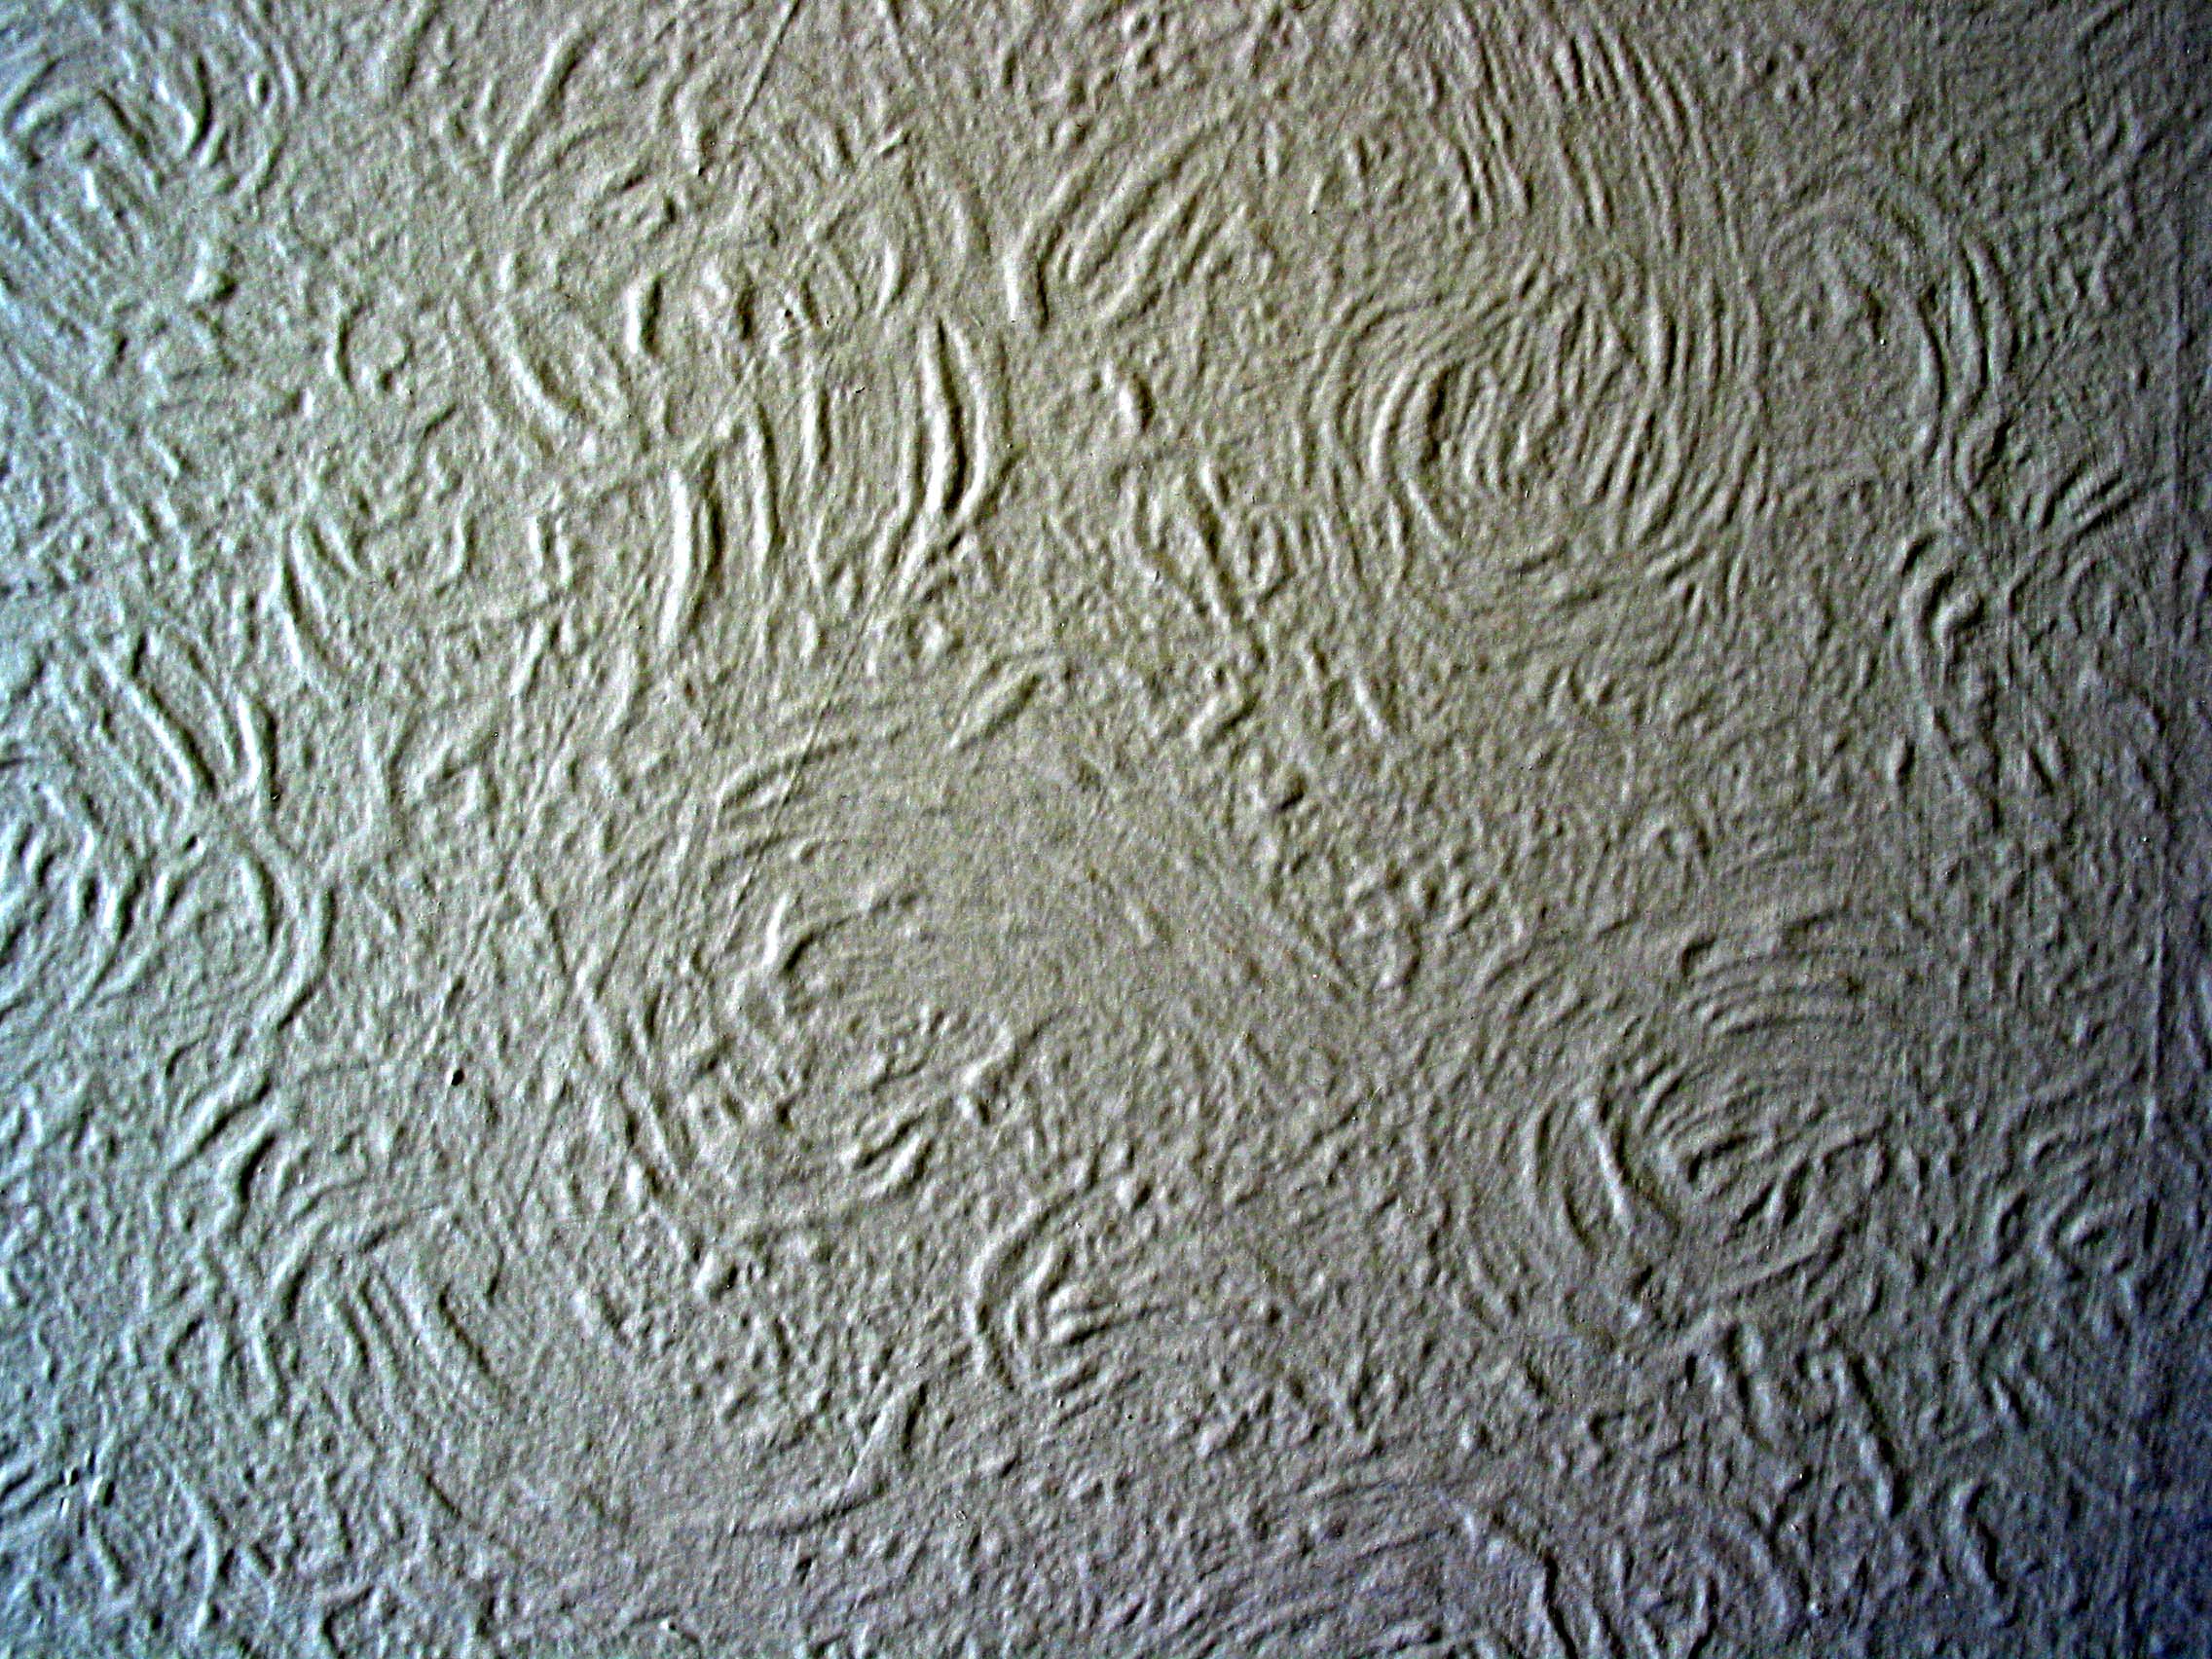 Textured wallpaper by bluecanarystock on